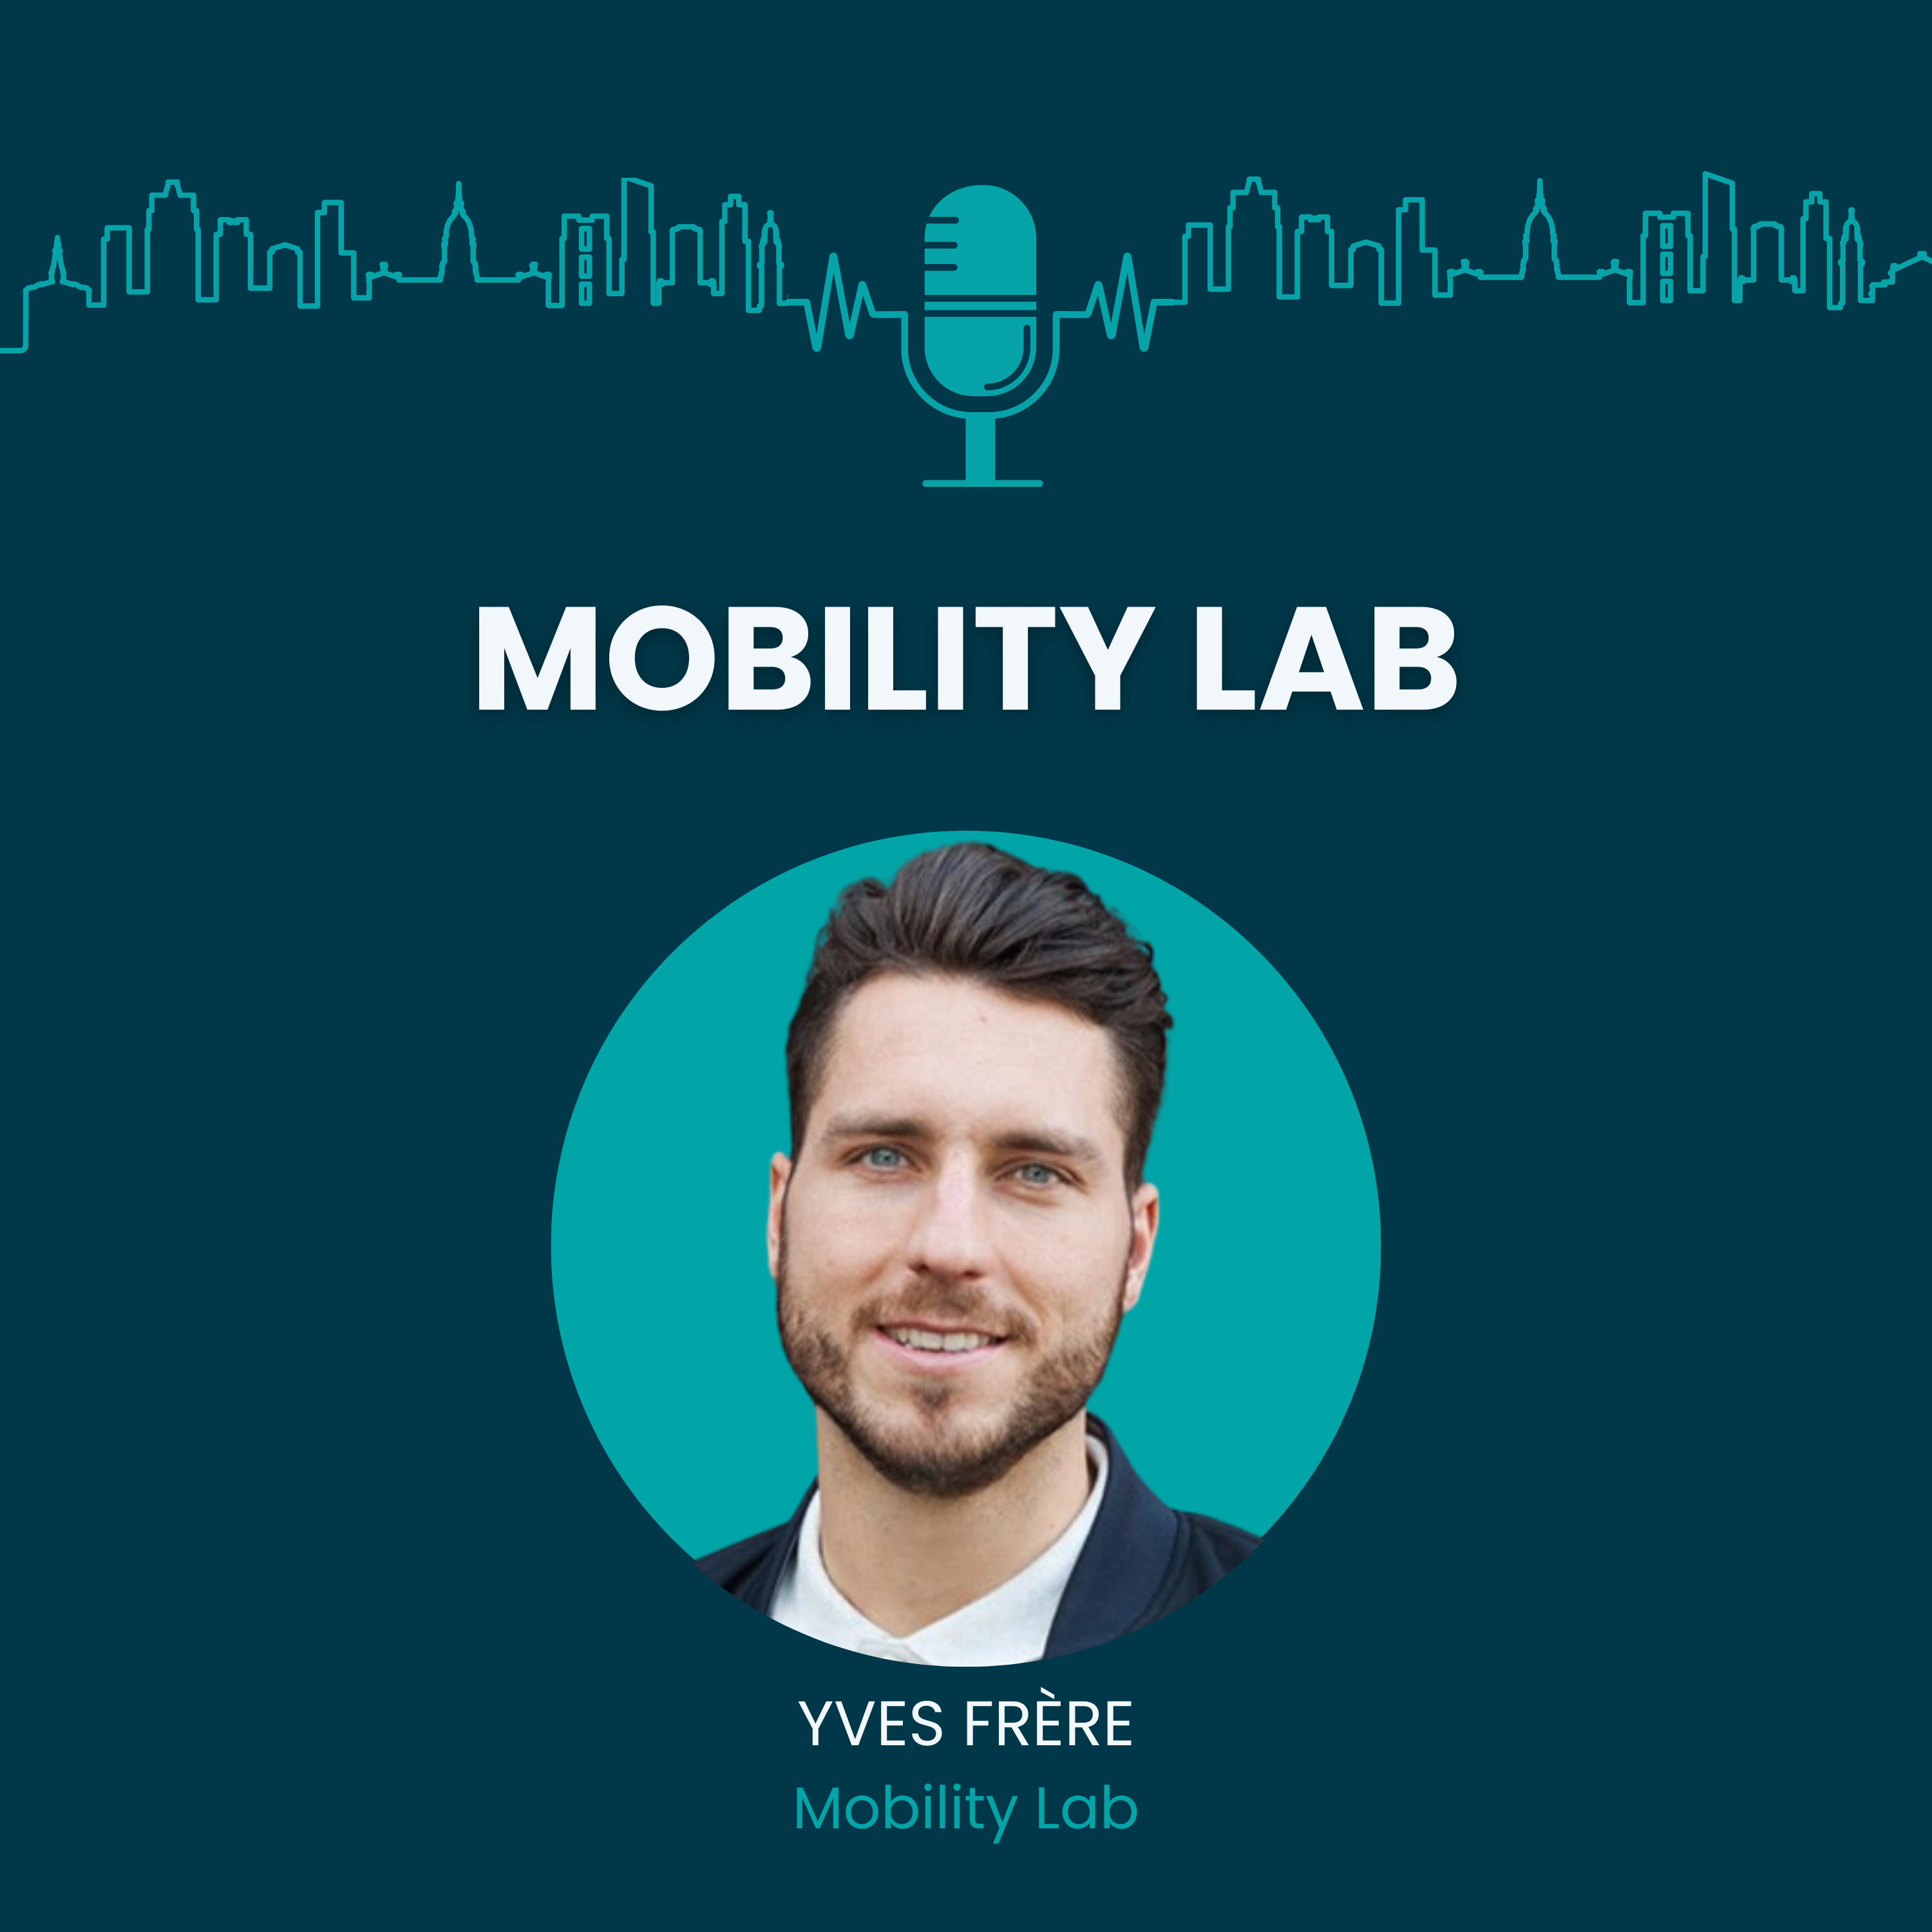 #7 Mobility Lab: "Don't Talk, But Test!"